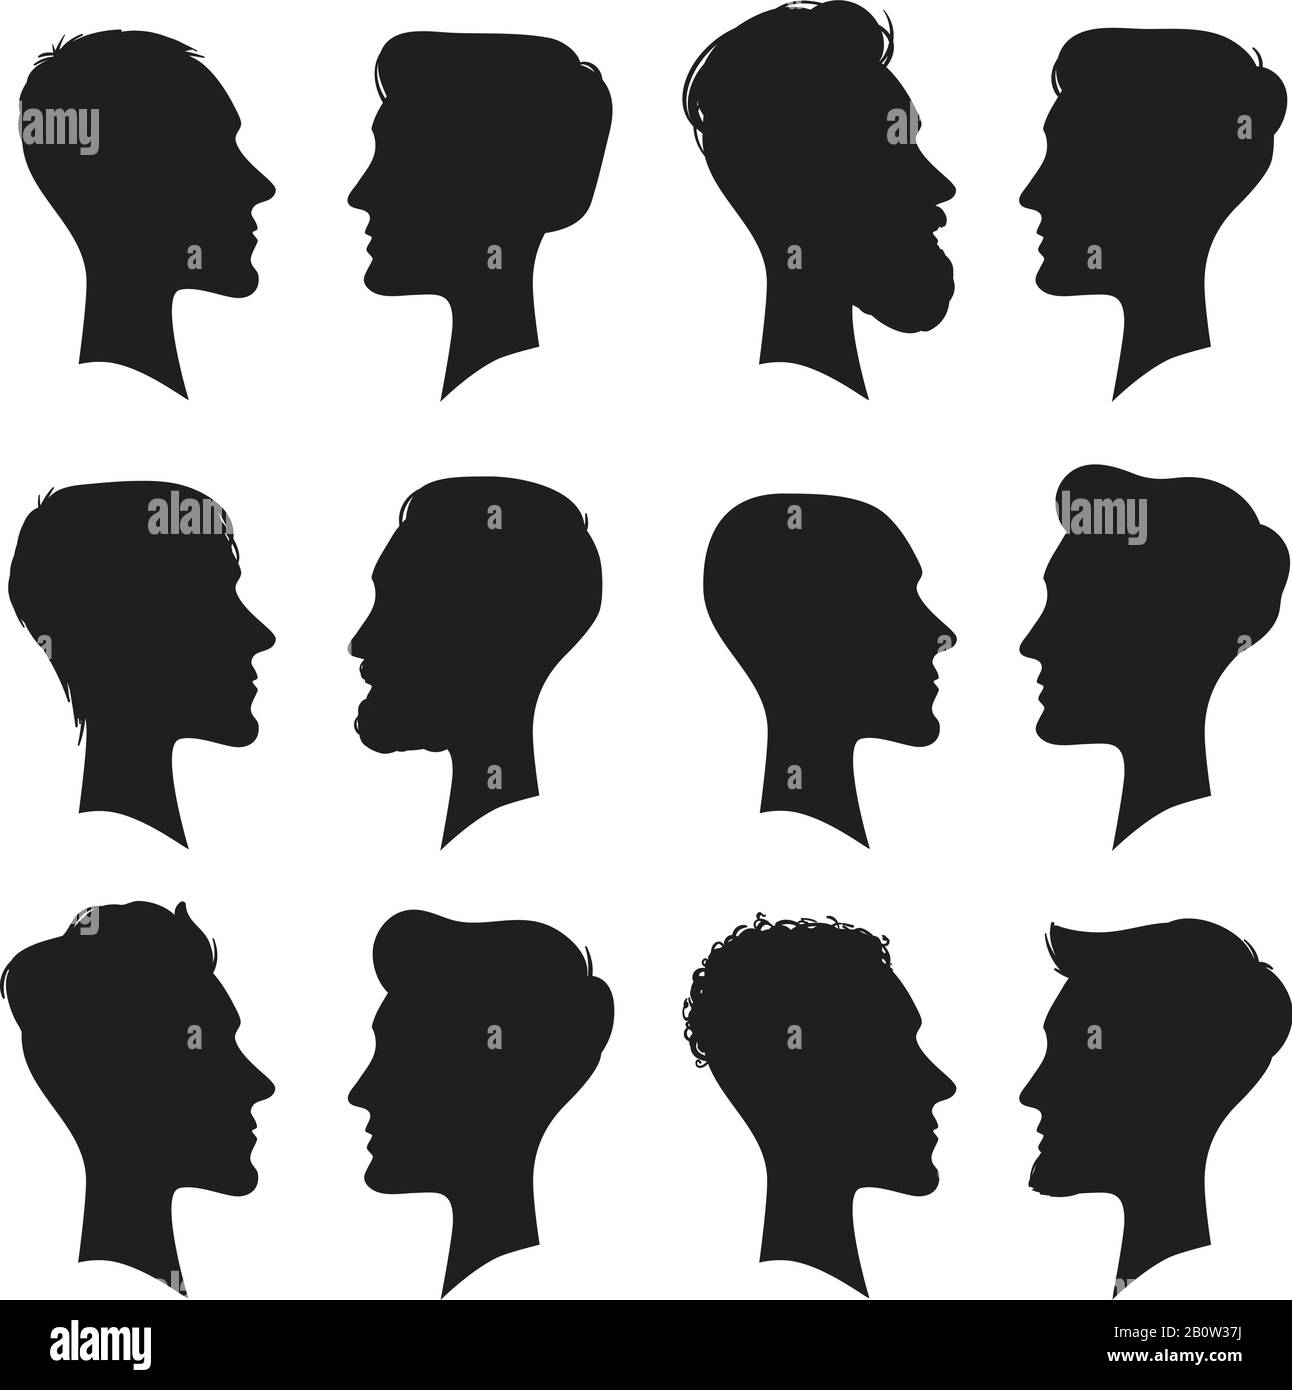 Adult male head profile silhouette. Man icon. Fashion people haircut or hairless men heads silhouettes isolated vector illustration Stock Vector